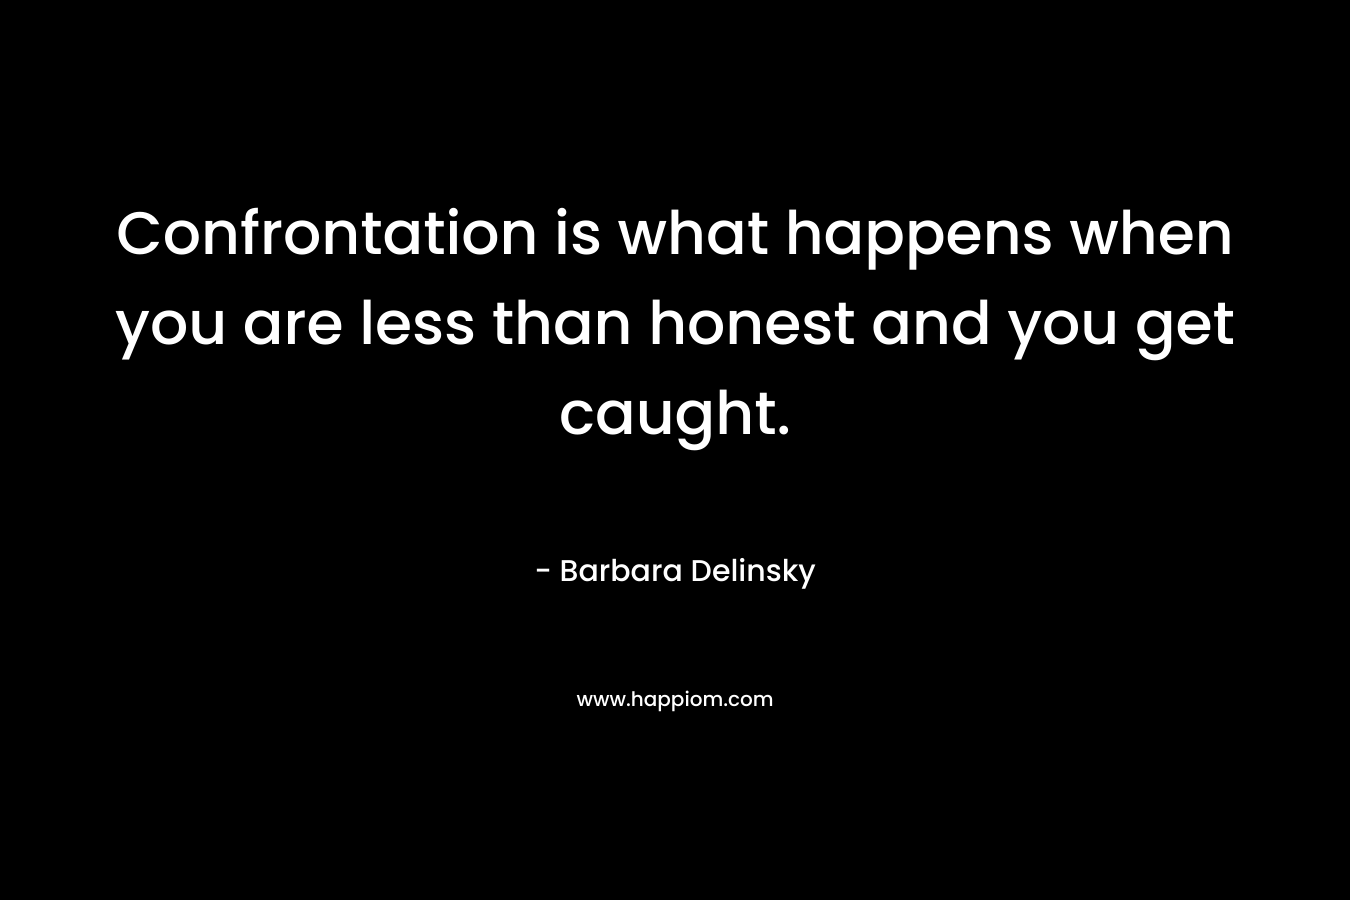 Confrontation is what happens when you are less than honest and you get caught. – Barbara Delinsky